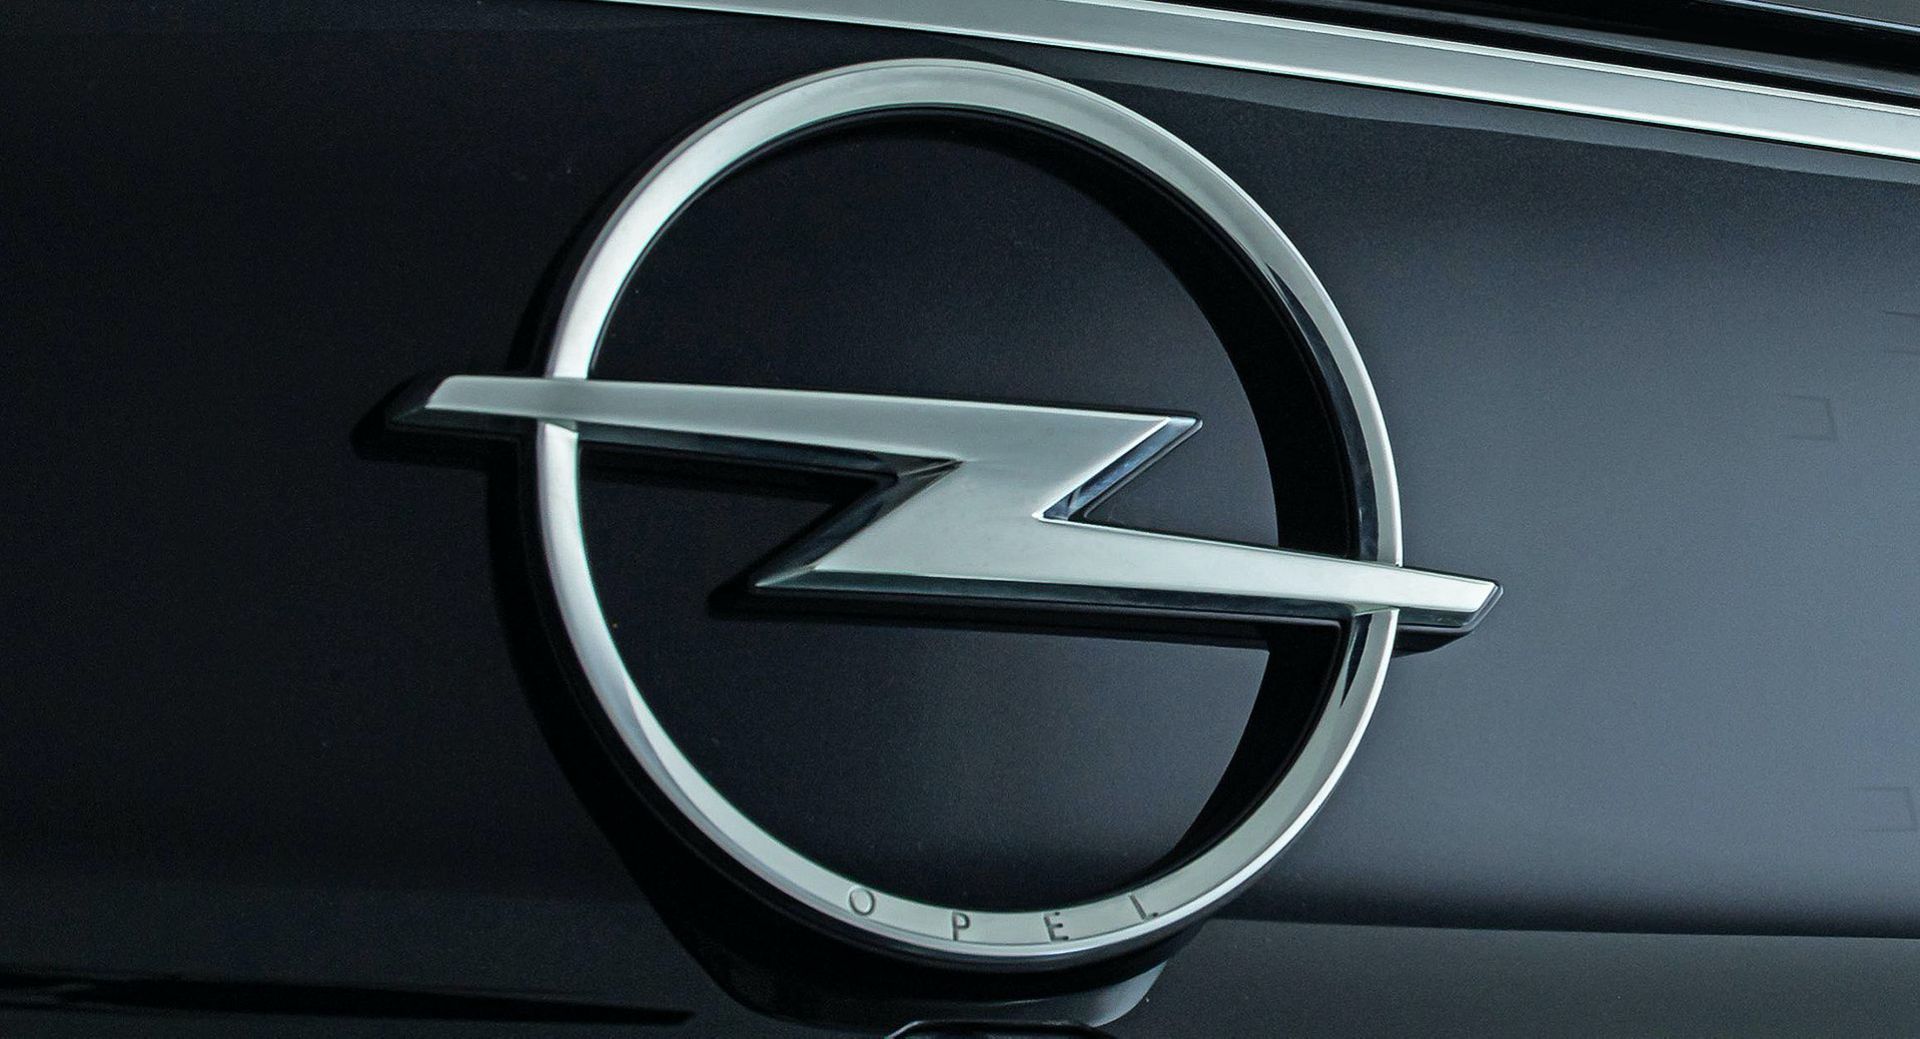 Turns Out The 2021 Mokka Debuted Opel's Redesigned 'Blitz' Logo